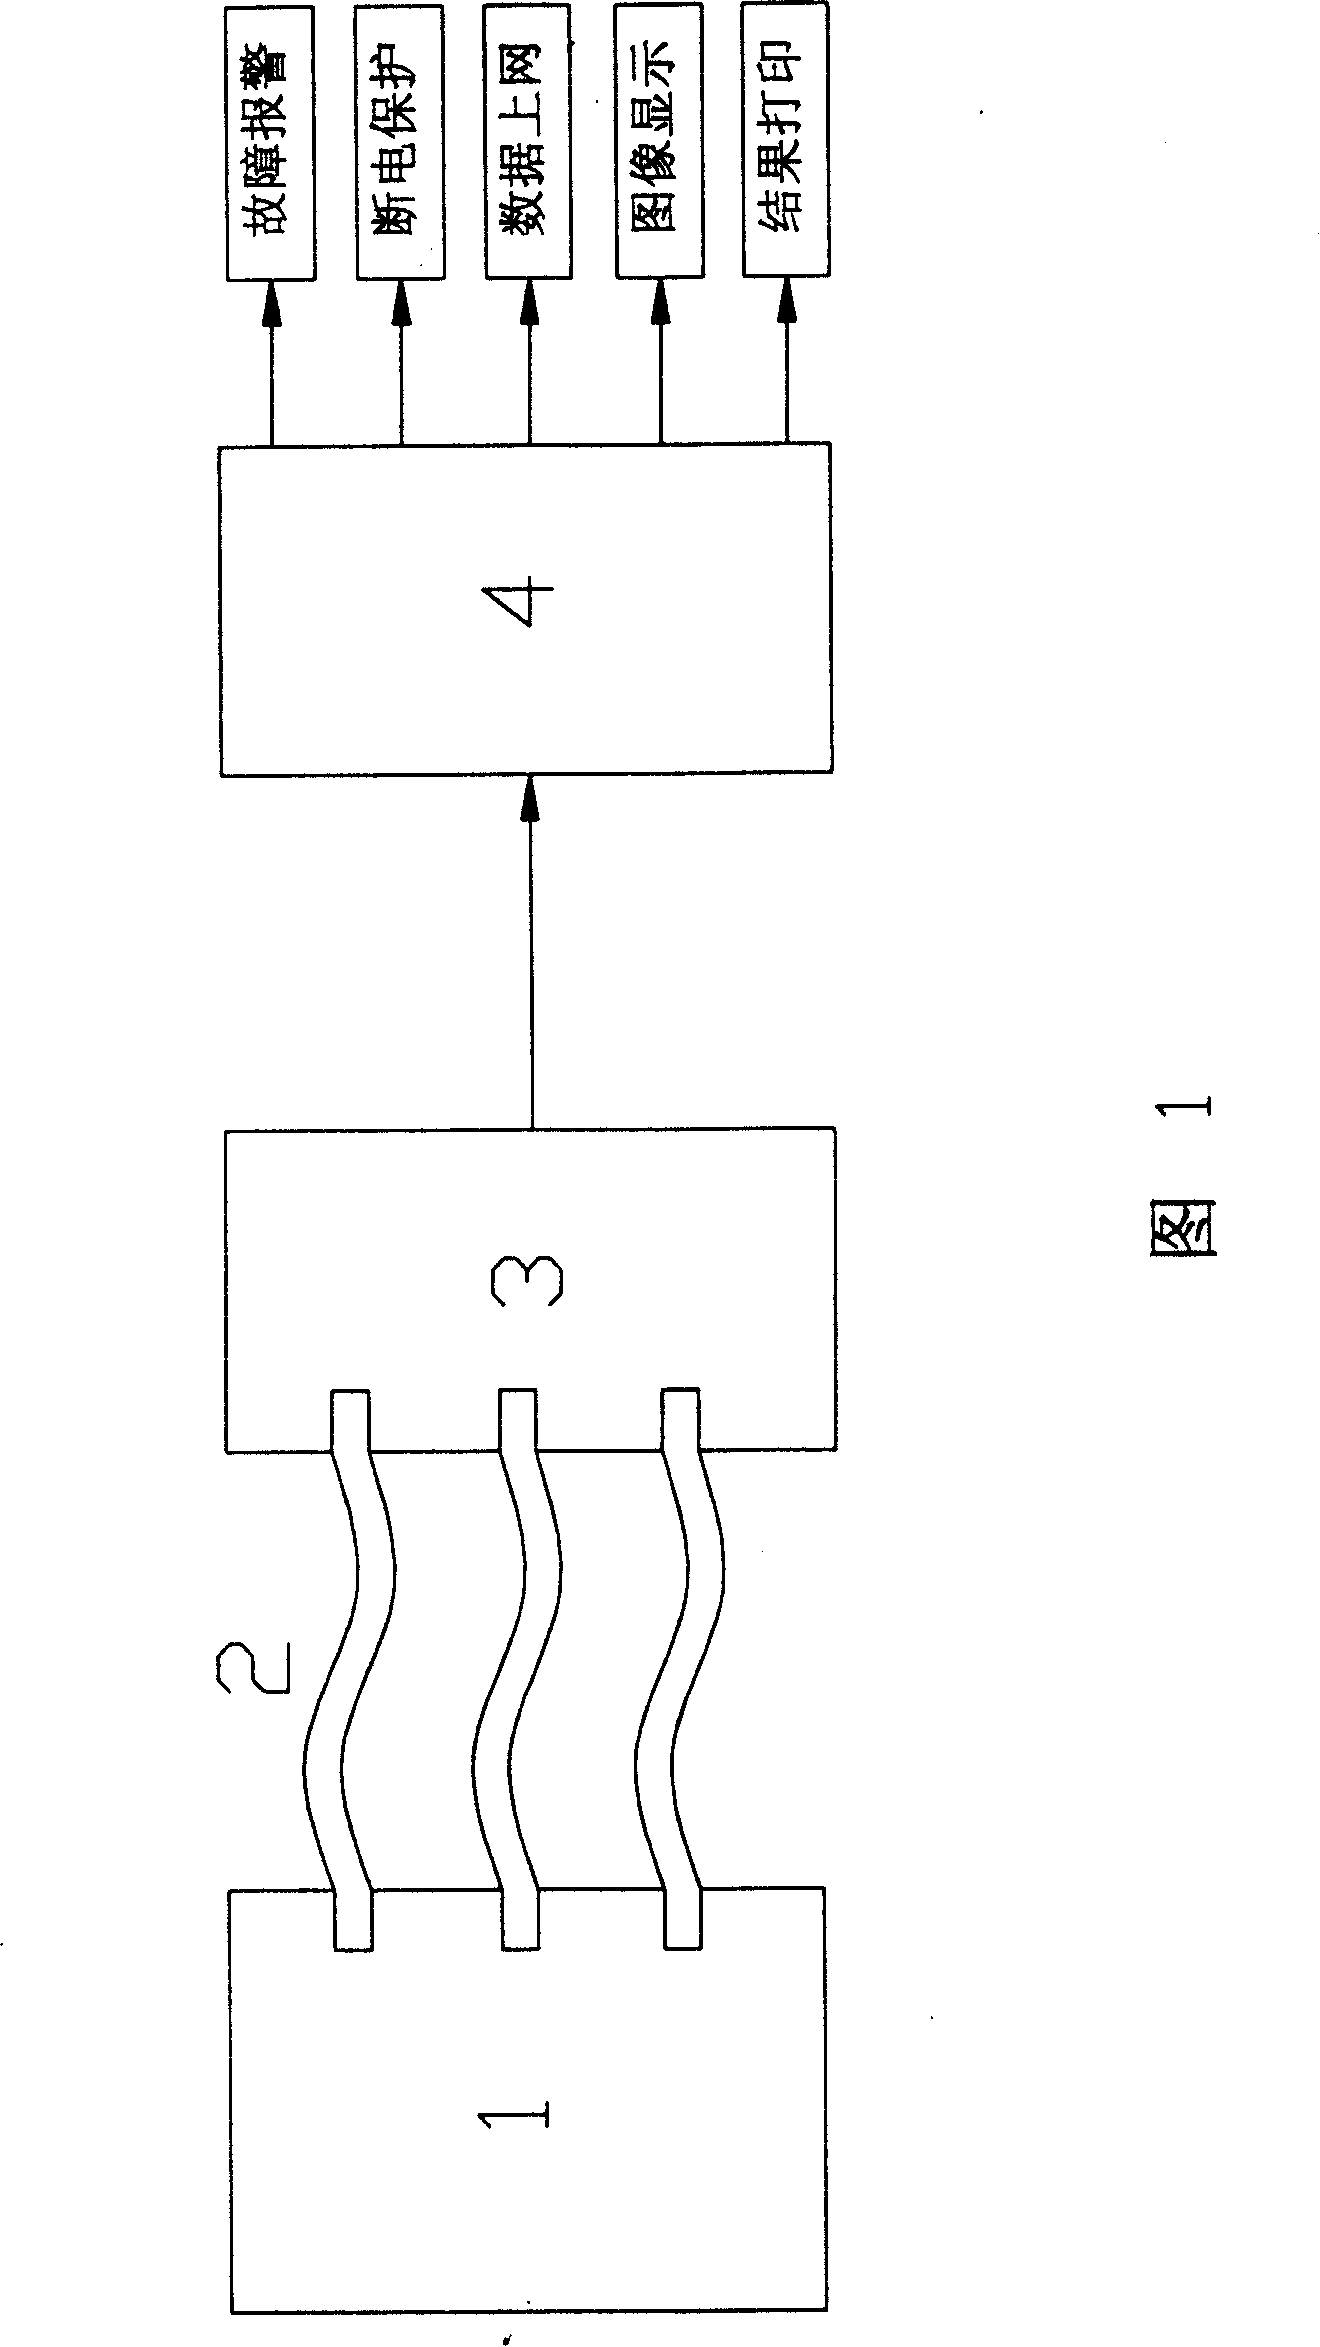 Optical signal collecting and on-line monitoring method for electric power equipment internal failure